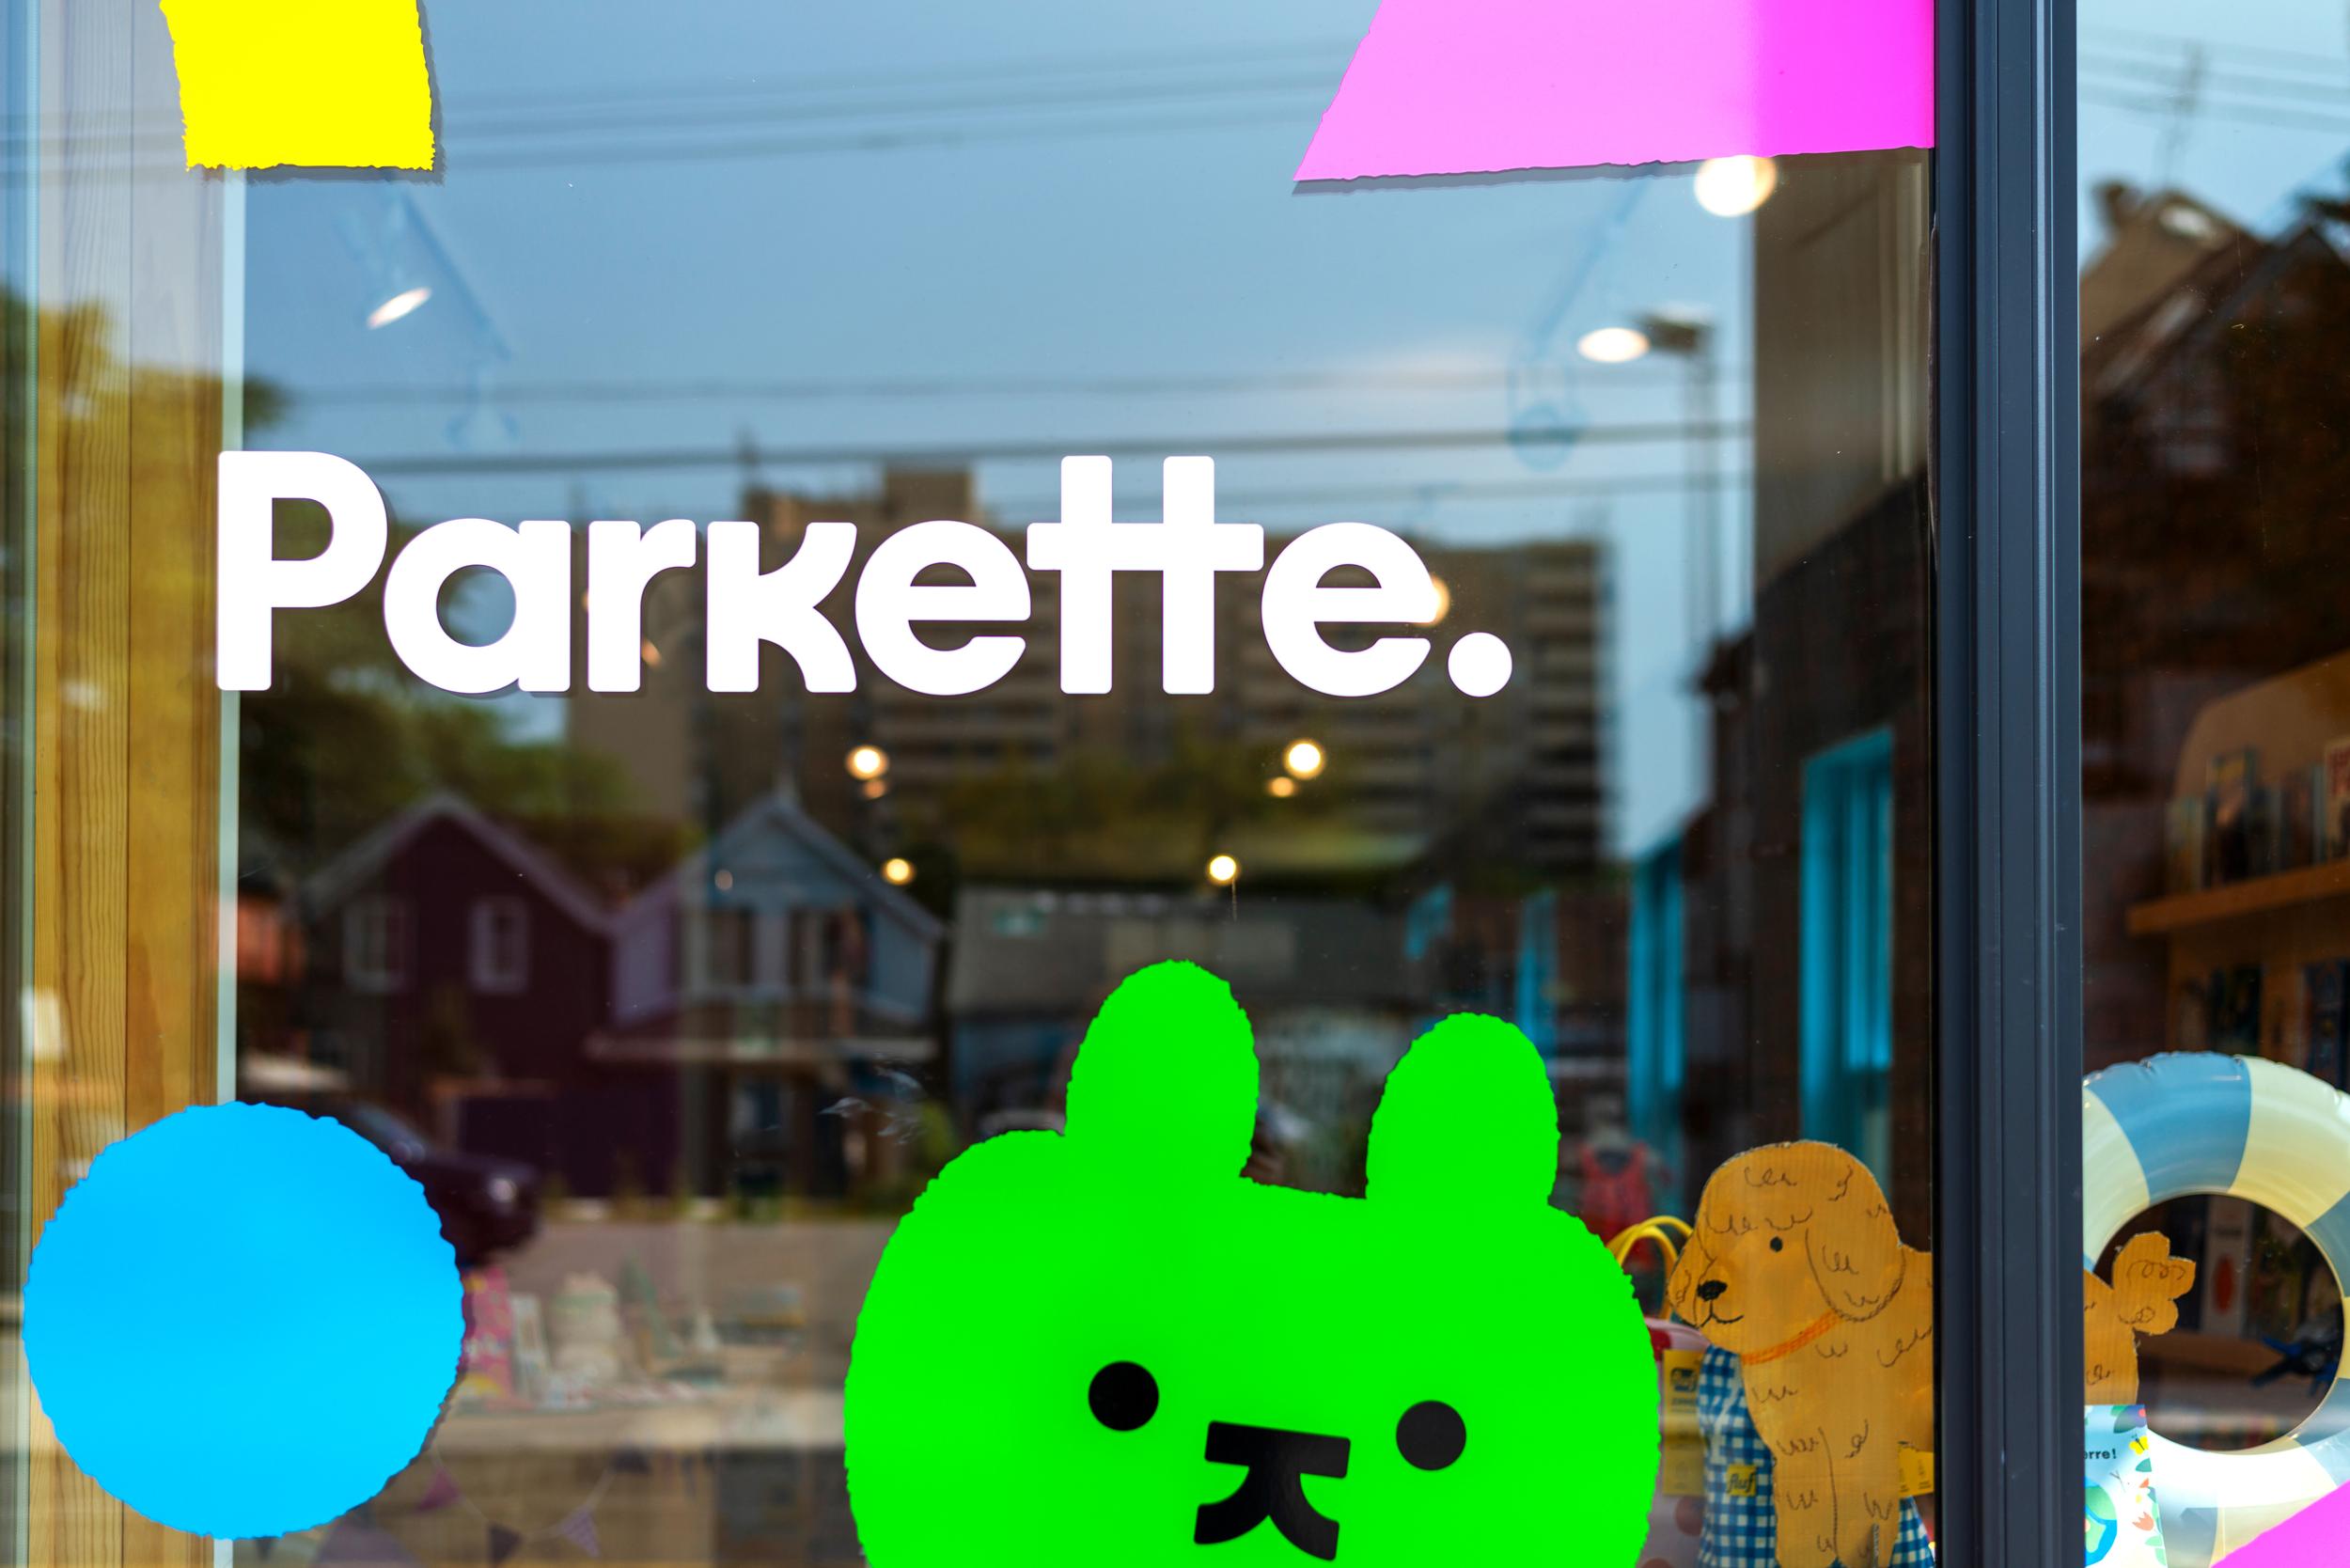 Logotype, illustration, character design and window decals designed by Kinoto for Canadian homeware shop Parkette